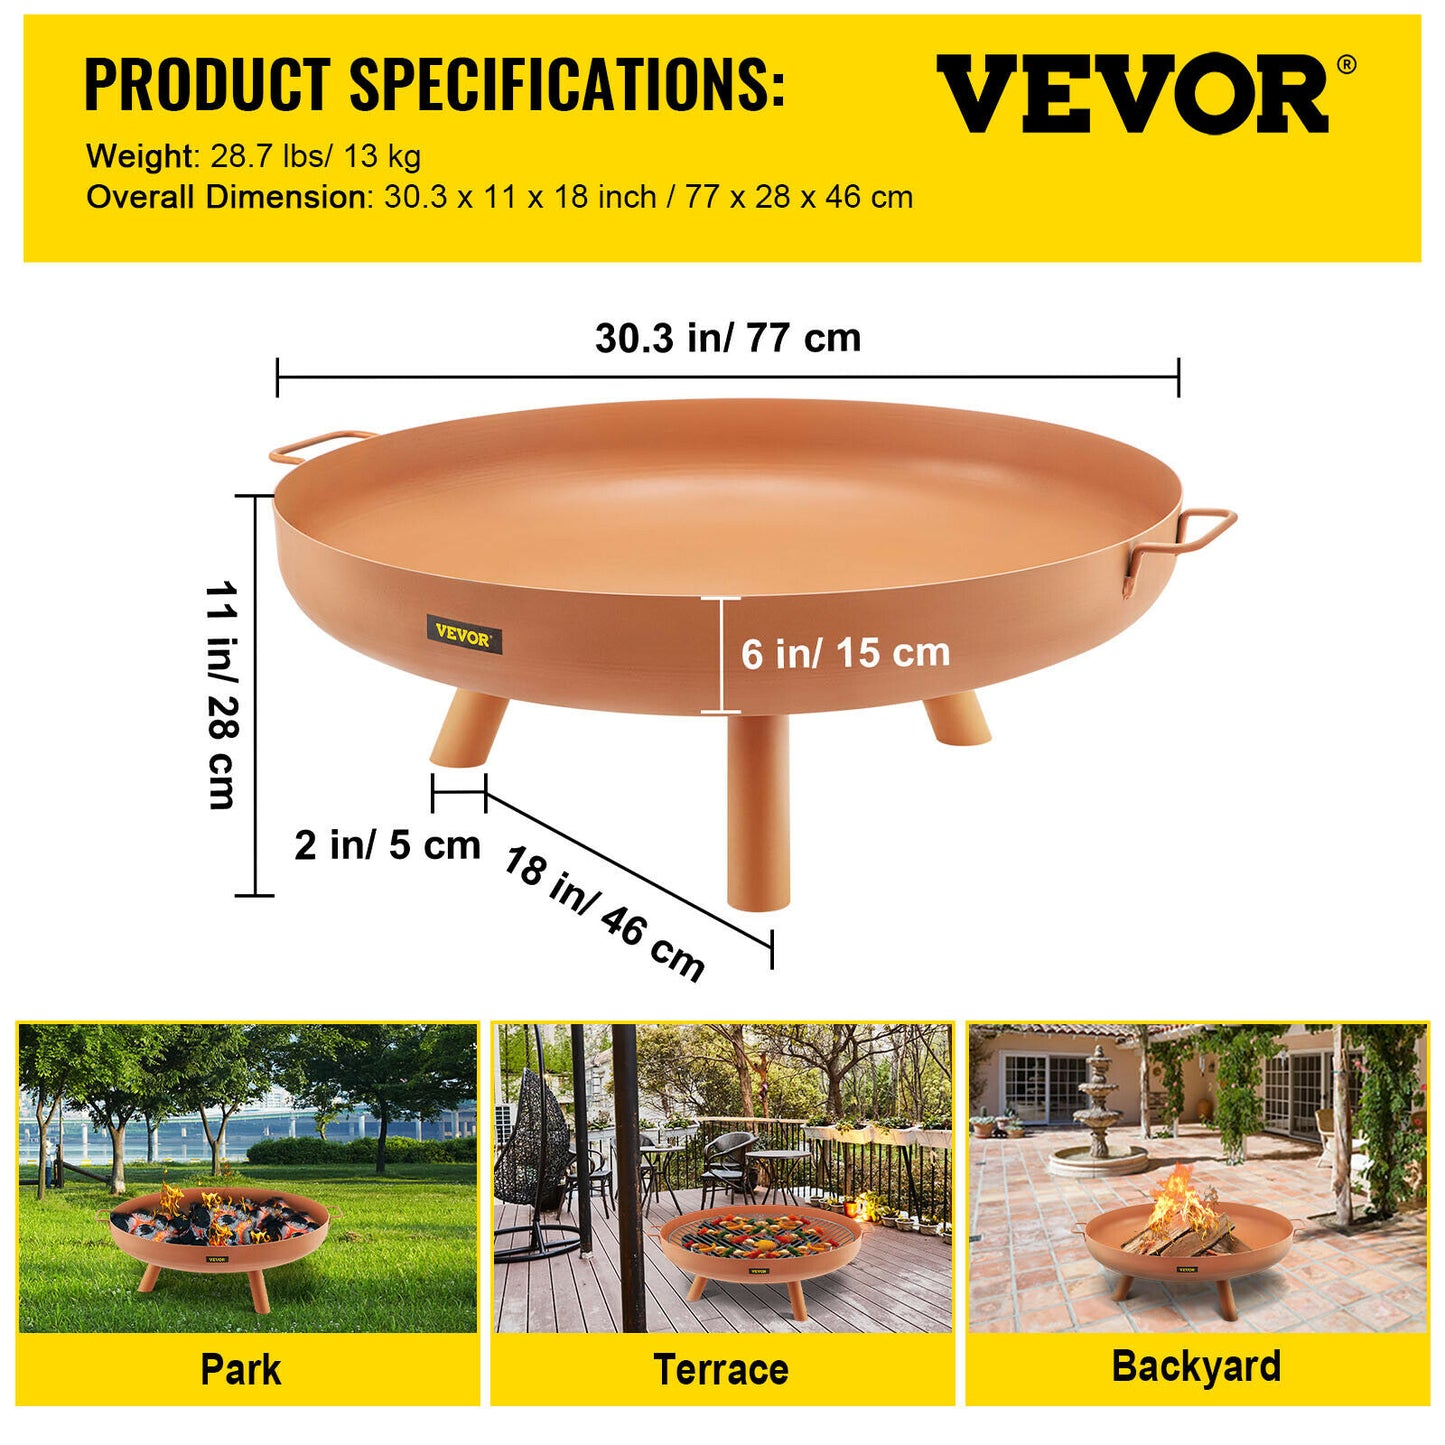 VEVOR Fire Pit Bowl BBQ Stove 22'' 28'' 30'' Carbon Steel / Cast Iron for Keeping Warm, Outdoor Patios Terrace Backyard Barbecue - DragonHearth